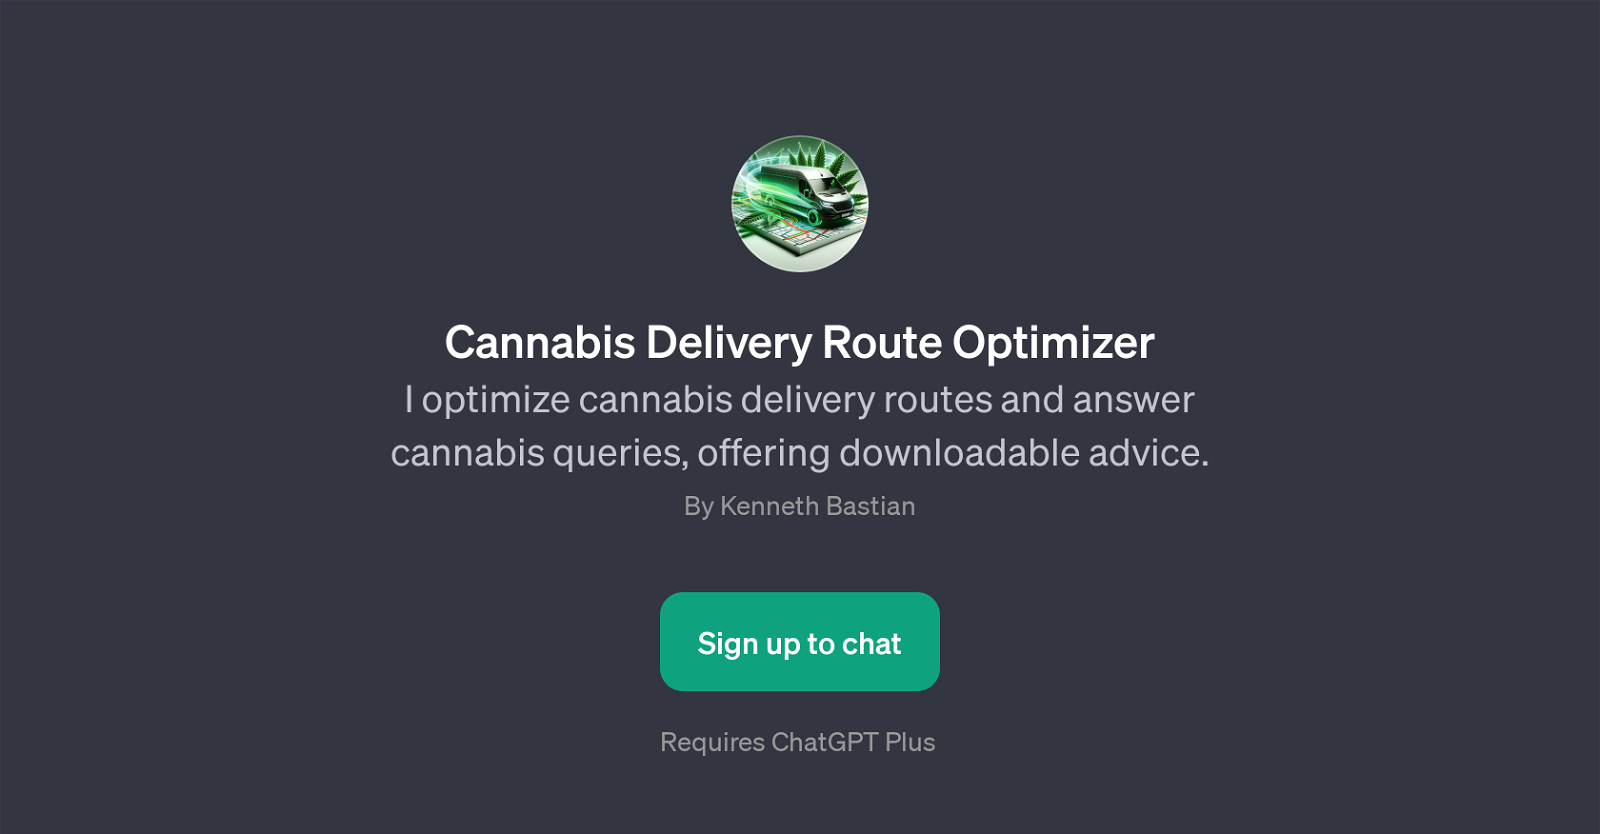 Cannabis Delivery Route Optimizer website